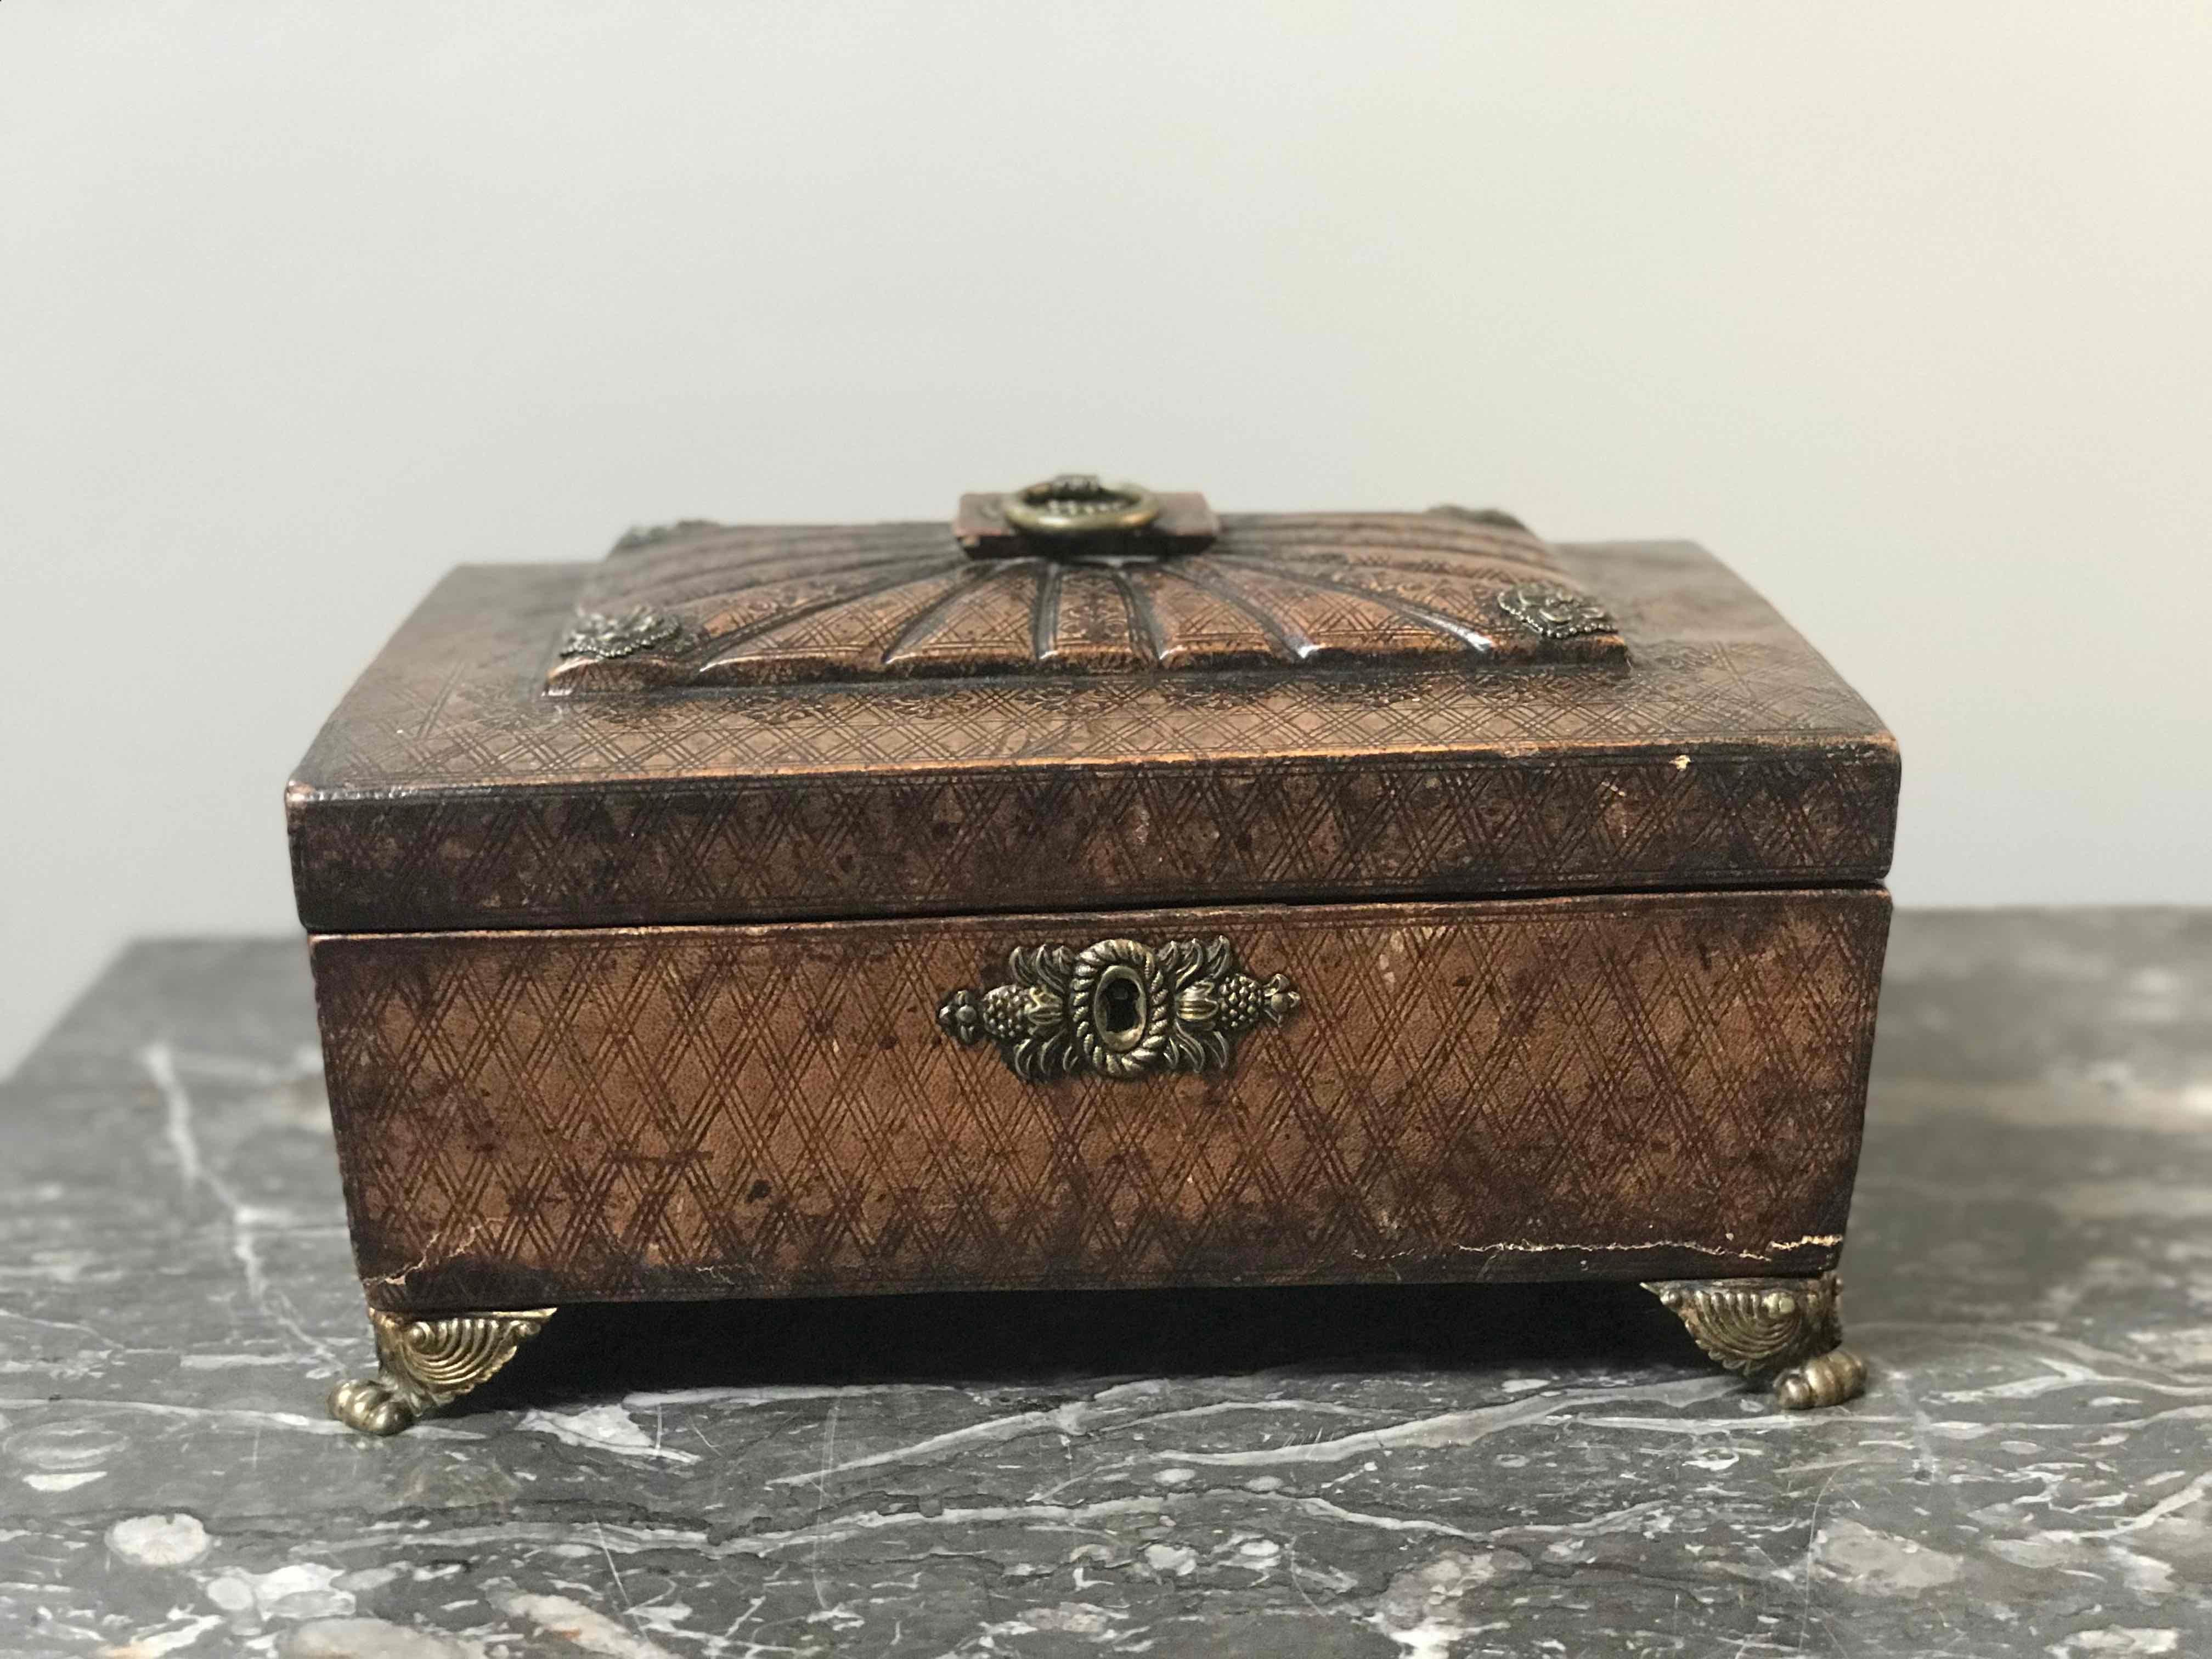 Leather decorative box from 1820s England. 